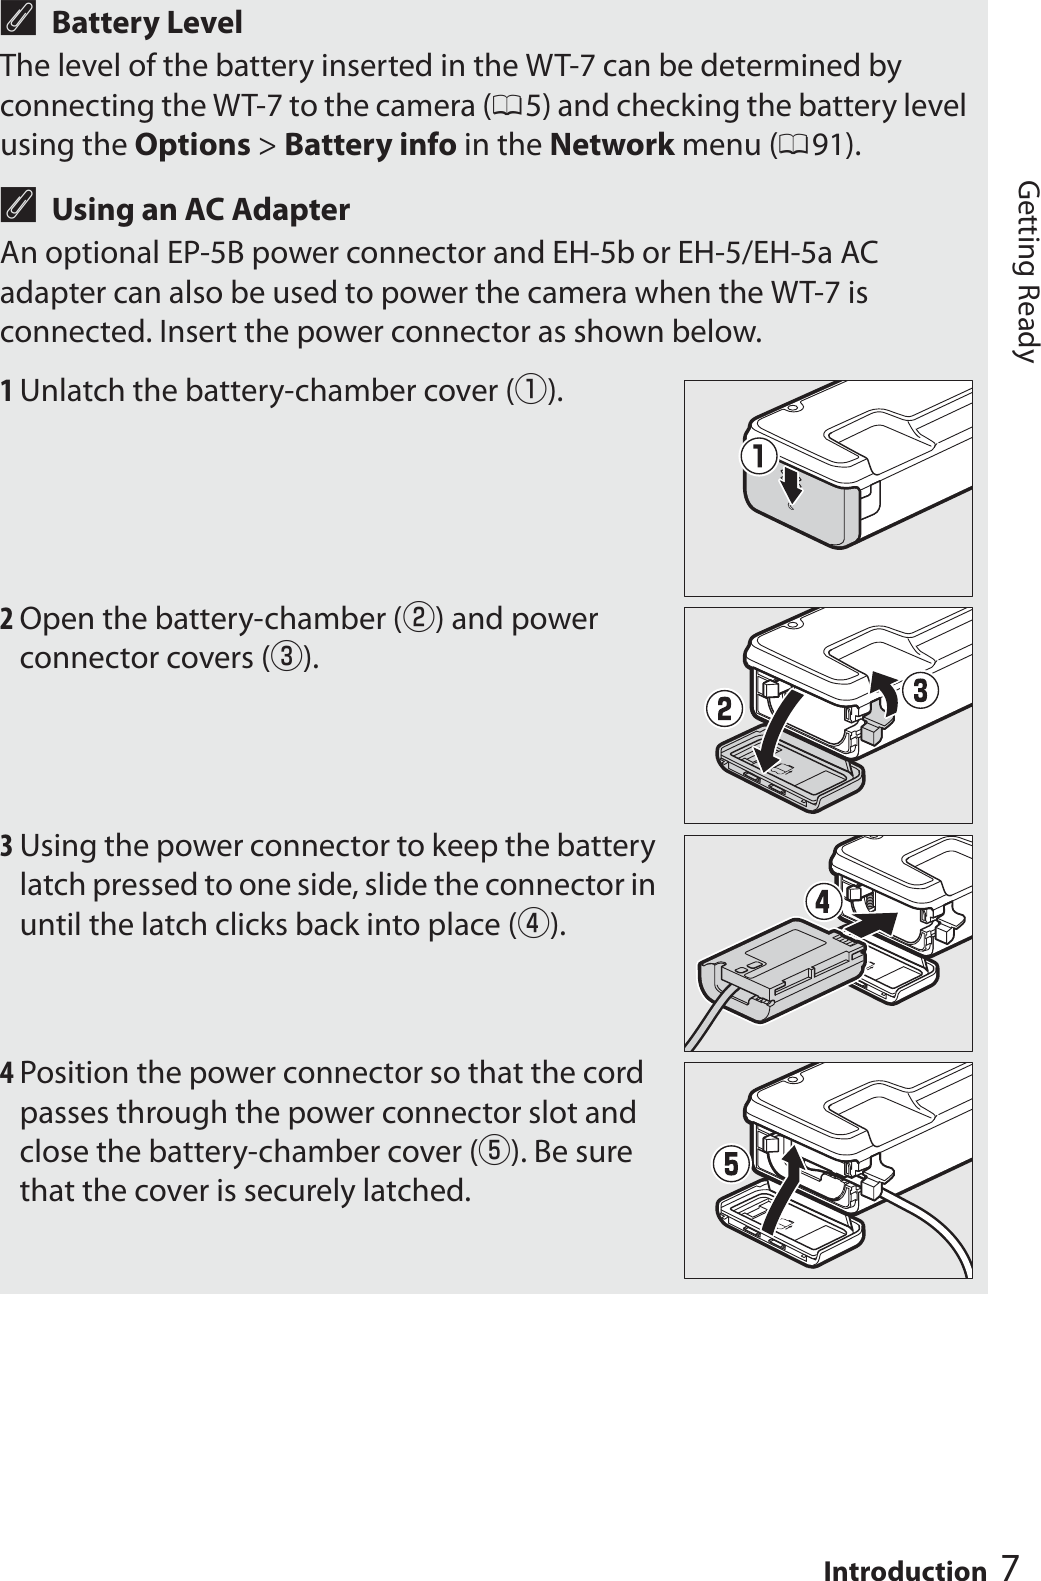 7IntroductionGetting ReadyABattery LevelThe level of the battery inserted in the WT-7 can be determined by connecting the WT-7 to the camera (05) and checking the battery level using the Options &gt; Battery info in the Network menu (091).AUsing an AC AdapterAn optional EP-5B power connector and EH-5b or EH-5/EH-5a AC adapter can also be used to power the camera when the WT-7 is connected. Insert the power connector as shown below.1Unlatch the battery-chamber cover (q).2Open the battery-chamber (w) and power connector covers (e).3Using the power connector to keep the battery latch pressed to one side, slide the connector in until the latch clicks back into place (r).4Position the power connector so that the cord passes through the power connector slot and close the battery-chamber cover (t). Be sure that the cover is securely latched.